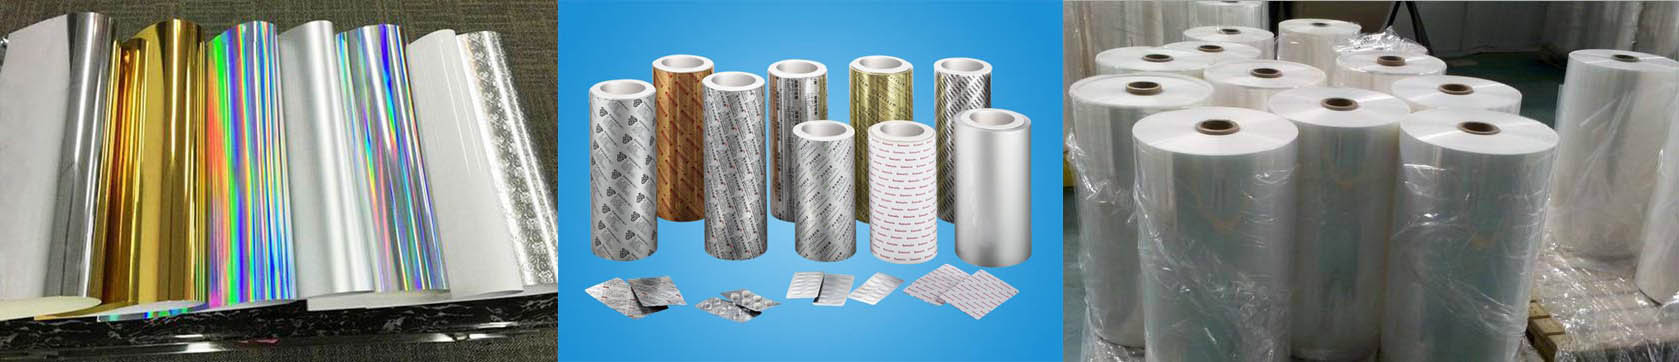 Types of materials used for packaging